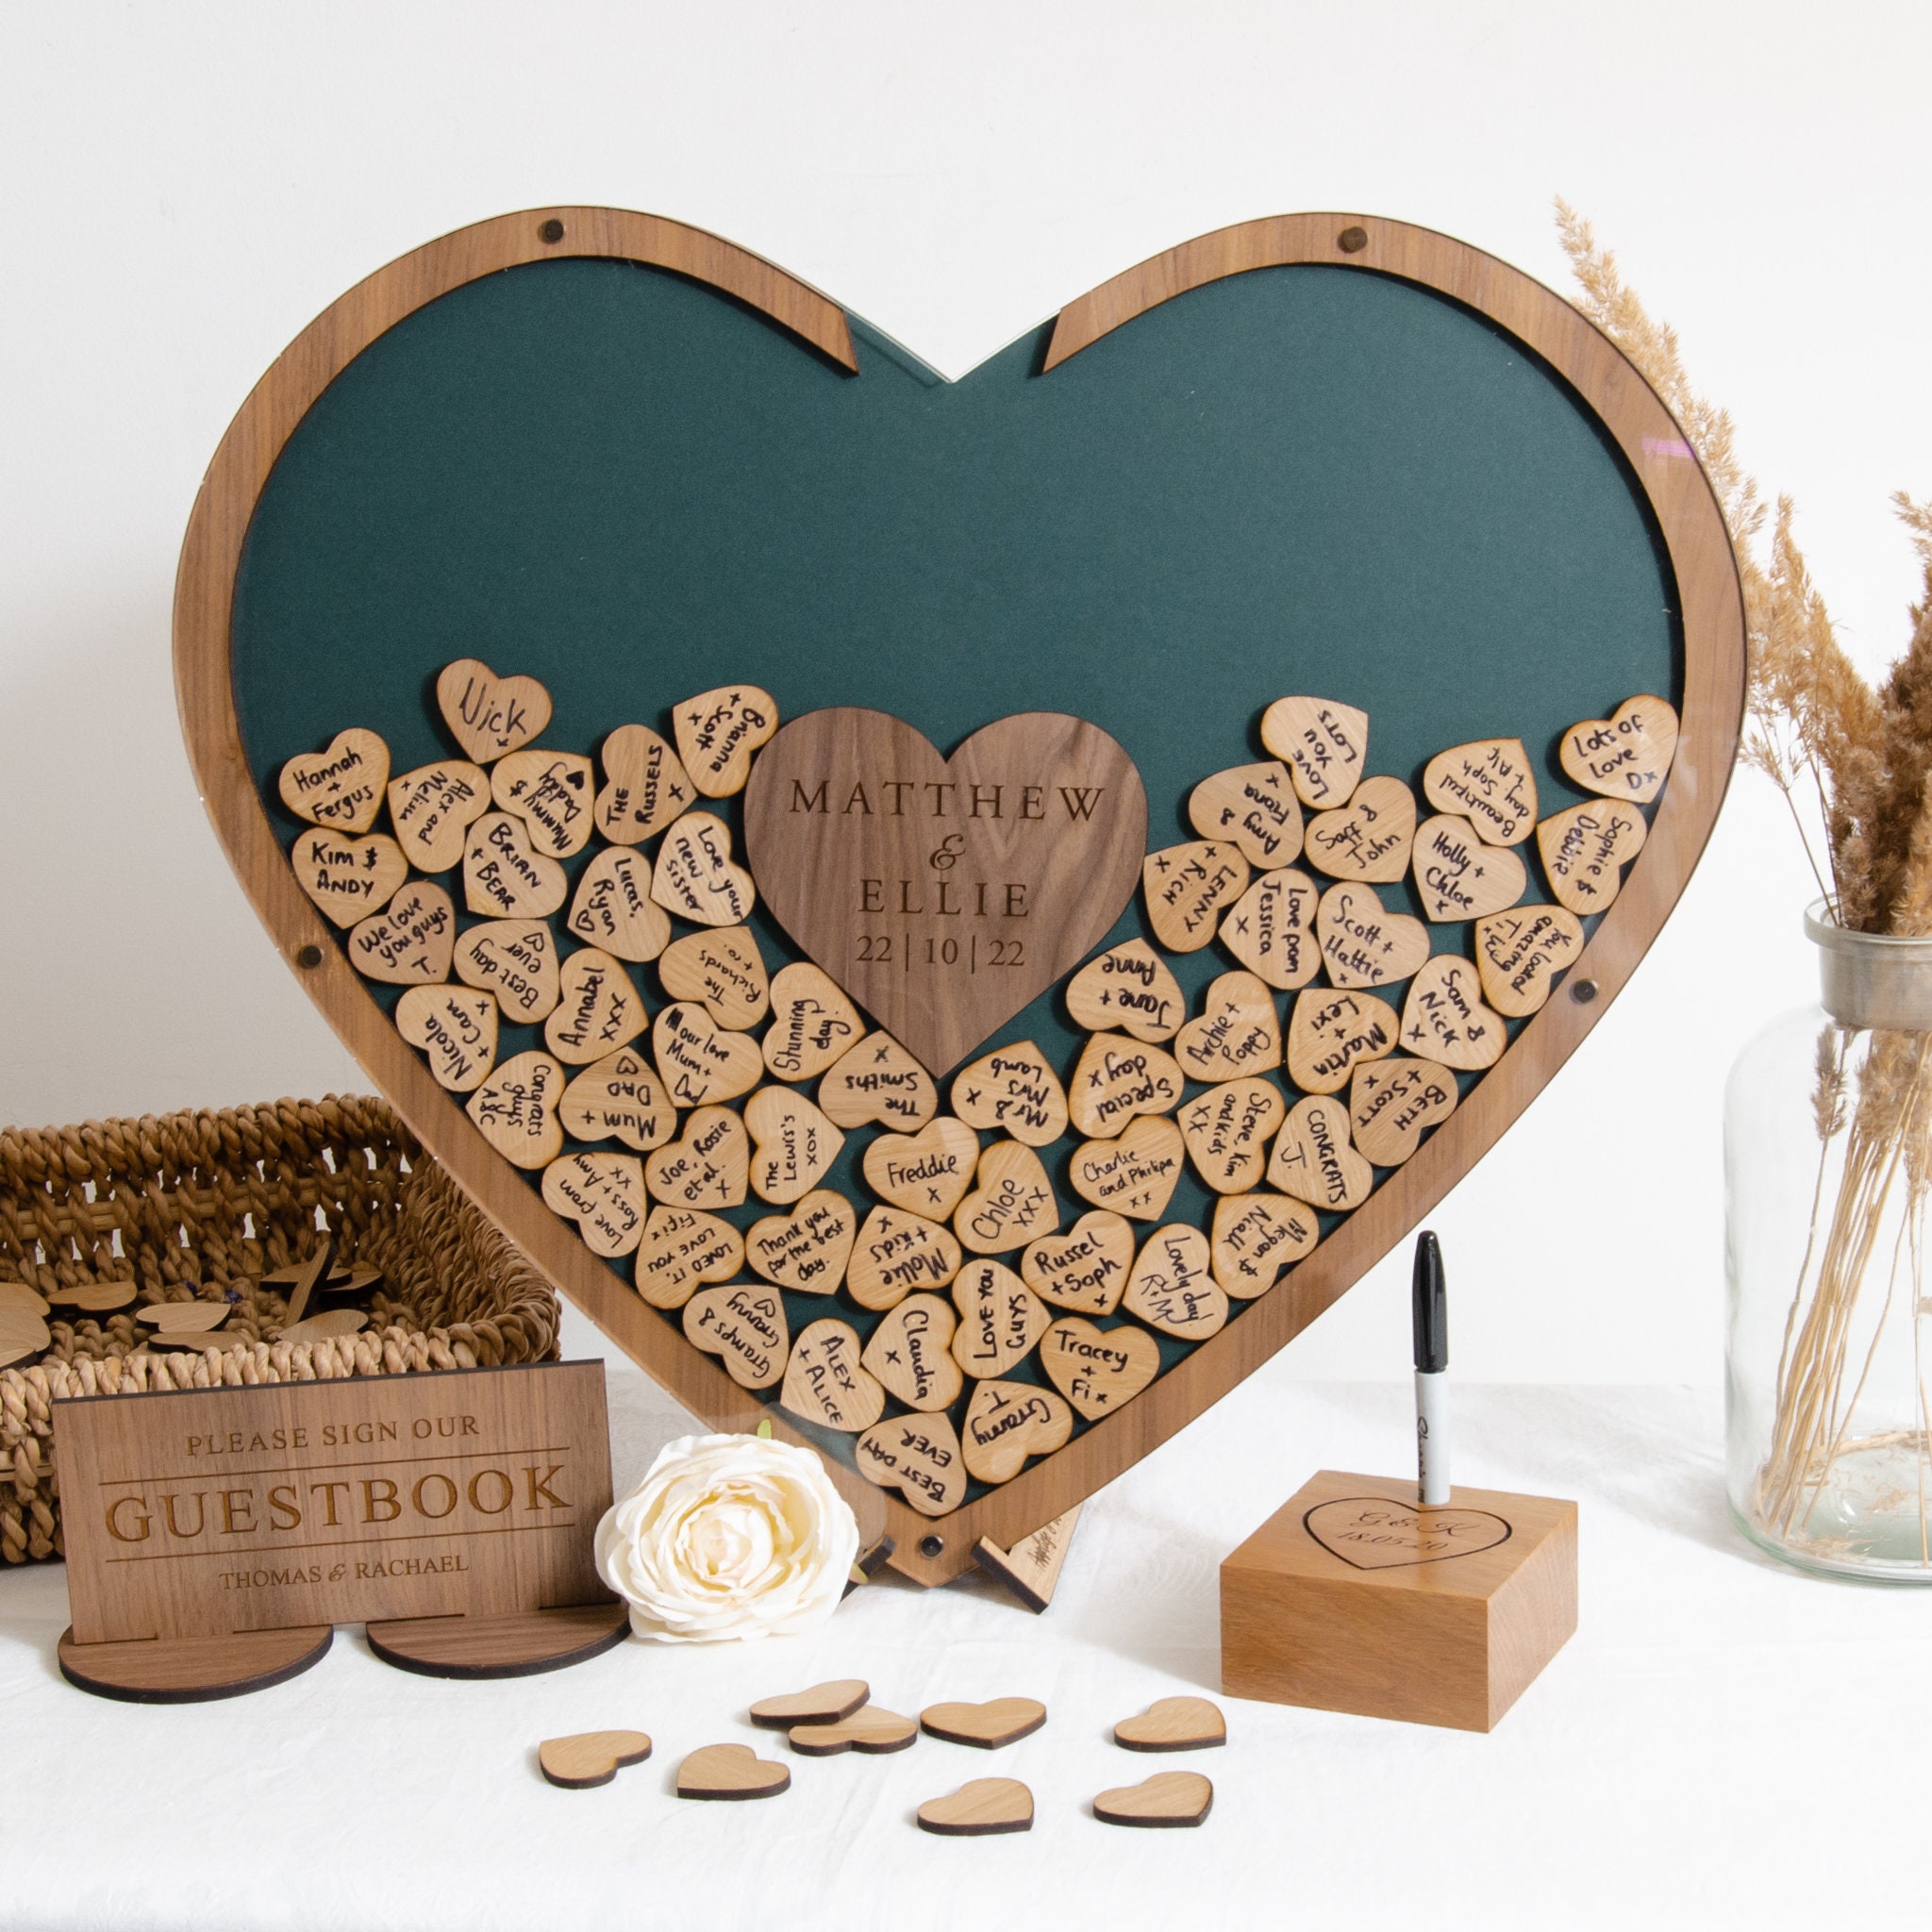 Wooden Hearts for Crafts - for Guest Book - Small Wooden Hearts - Wood  Tokens - Cutout Hearts - Wood Hearts for Crafts 50 Pieces (Rustic Hearts)